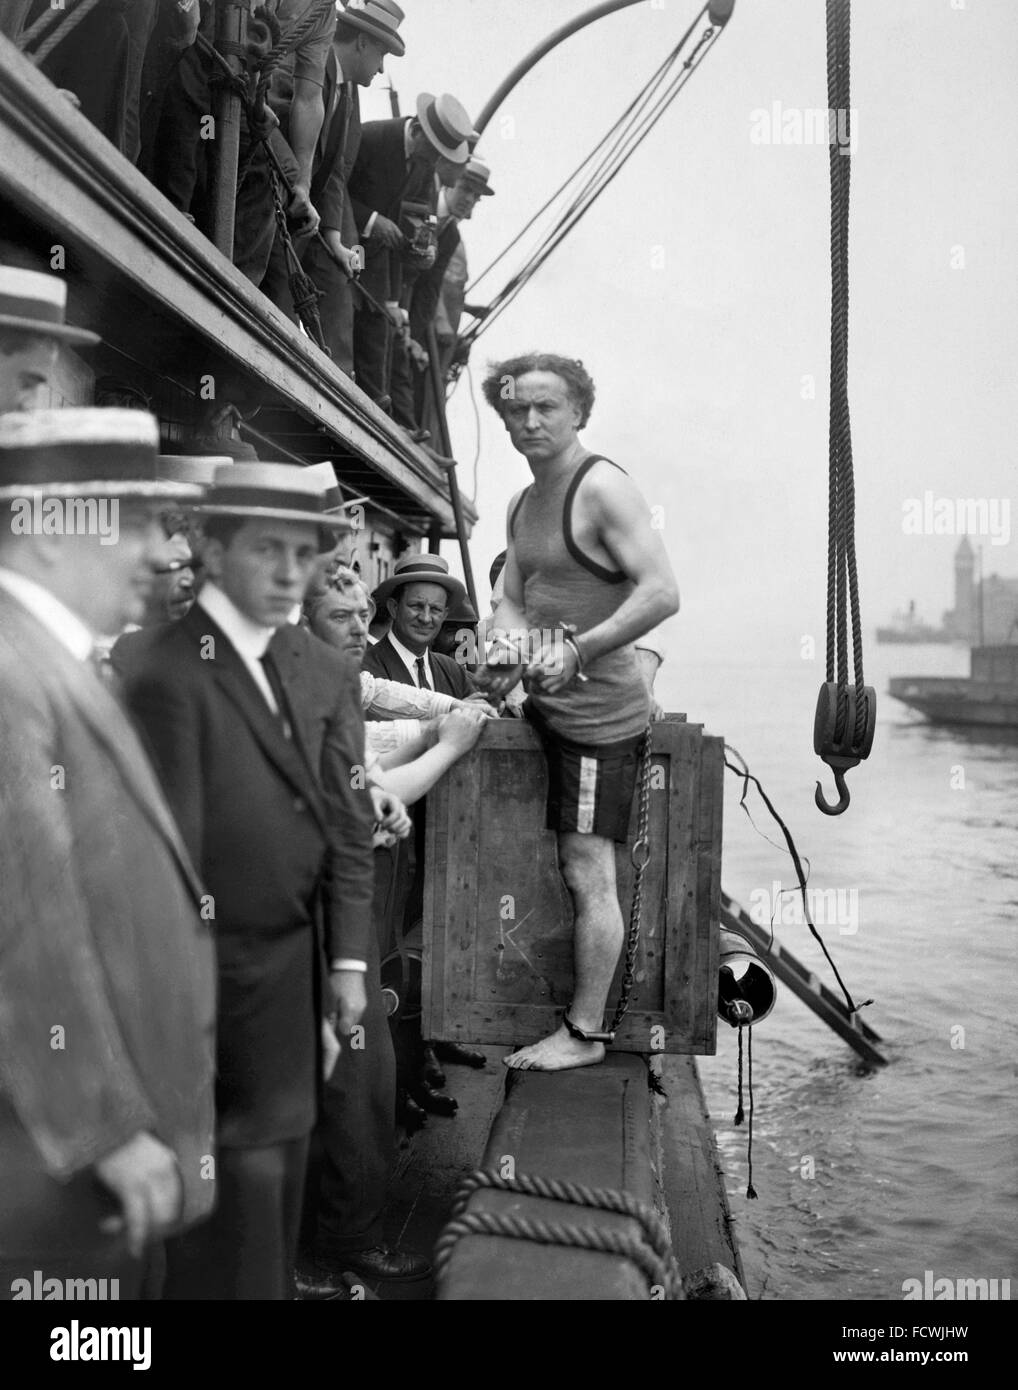 Harry Houdini stepping into a crate that will be lowered into New York Harbor as part of an escape stunt, 7th July 1912 Stock Photo